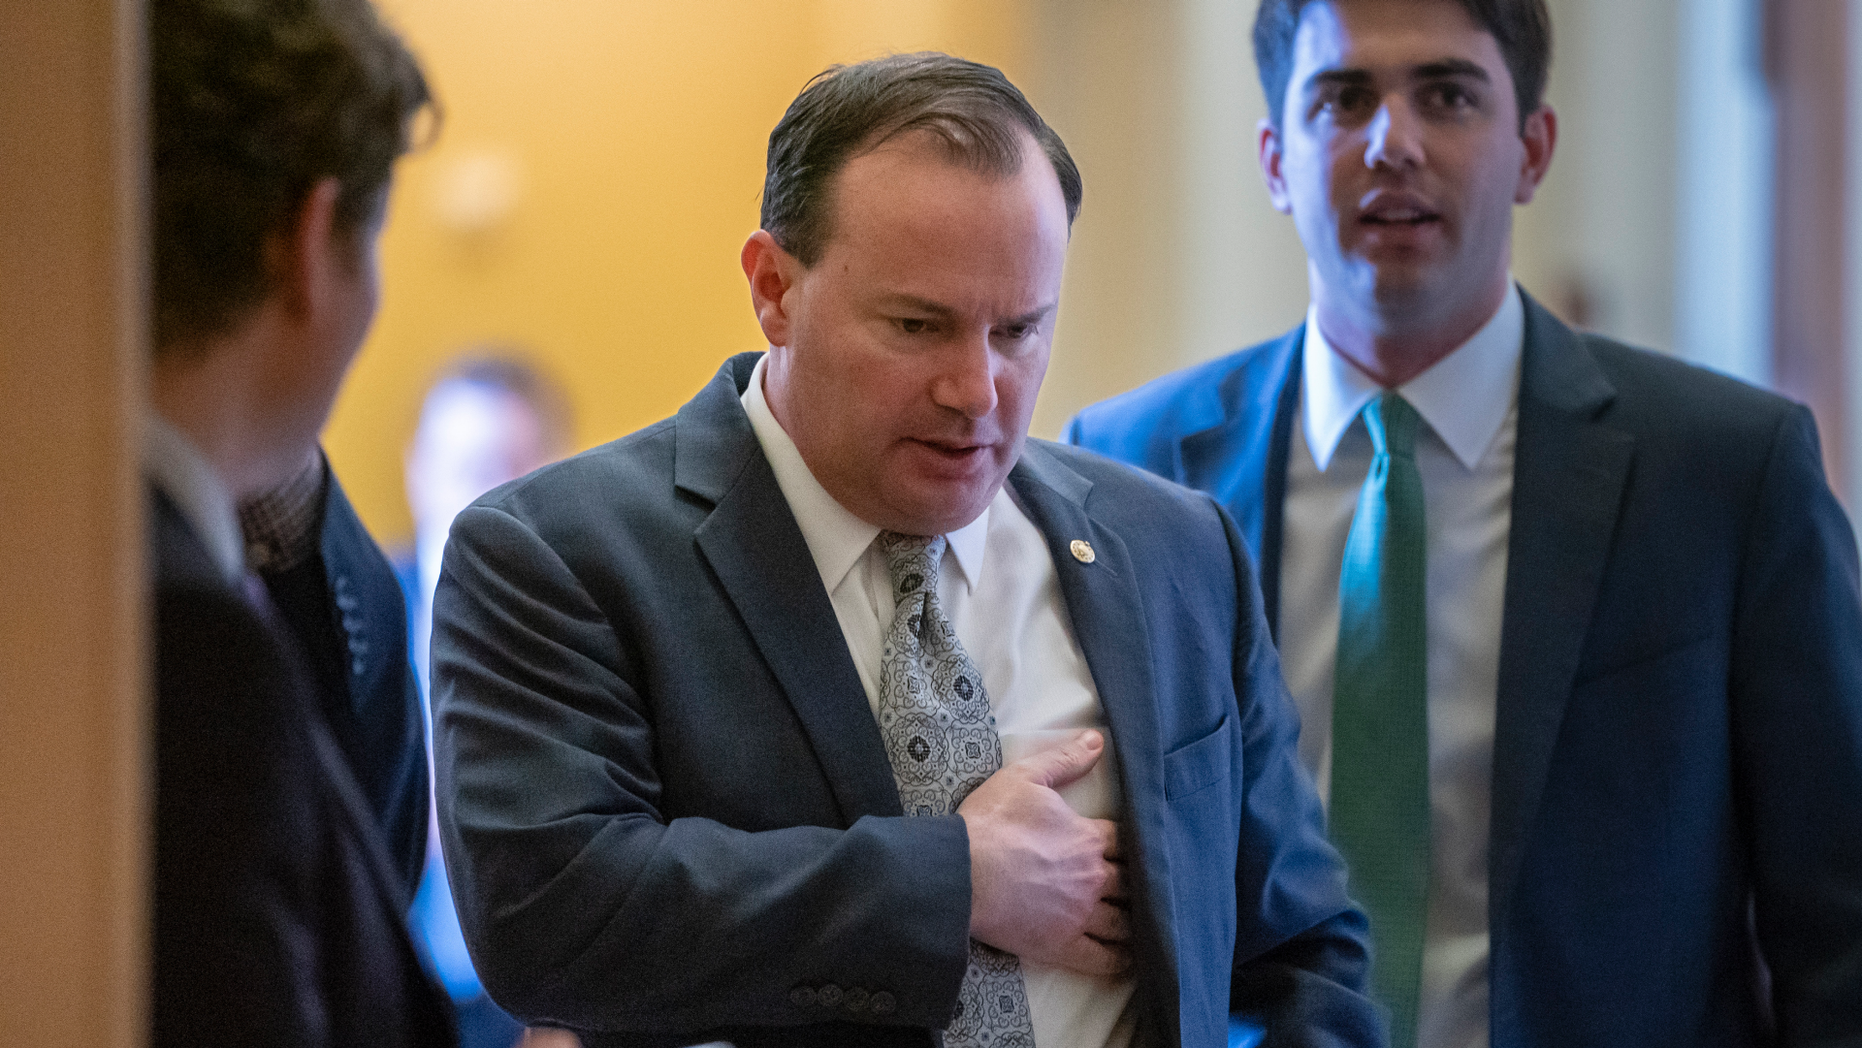 Sen. Mike Lee, R-Utah, leaves a Republican lunch meeting and heads to the chamber where he voted to reject President Donald Trump's declaration of a national emergency at the southwest border, at the Capitol in Washington, Thursday, March 14, 2019. Twelve Republicans joined Democrats in defying Trump. (AP Photo/J. Scott Applewhite)